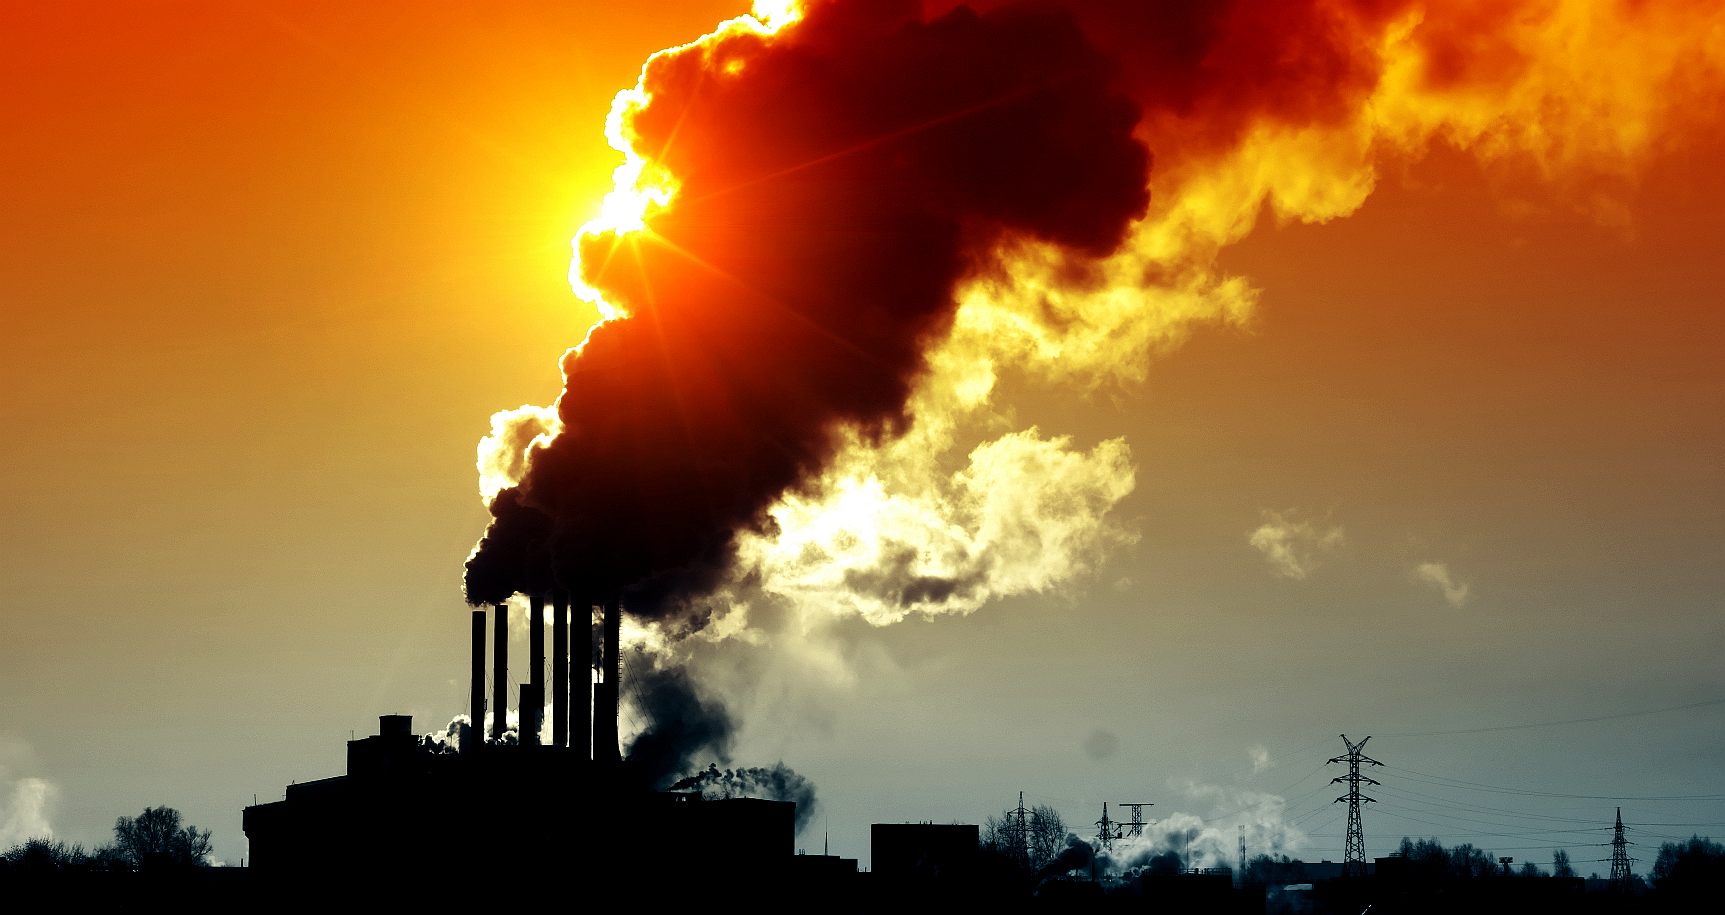 Factories churn out greenhouse gases by the bucket load